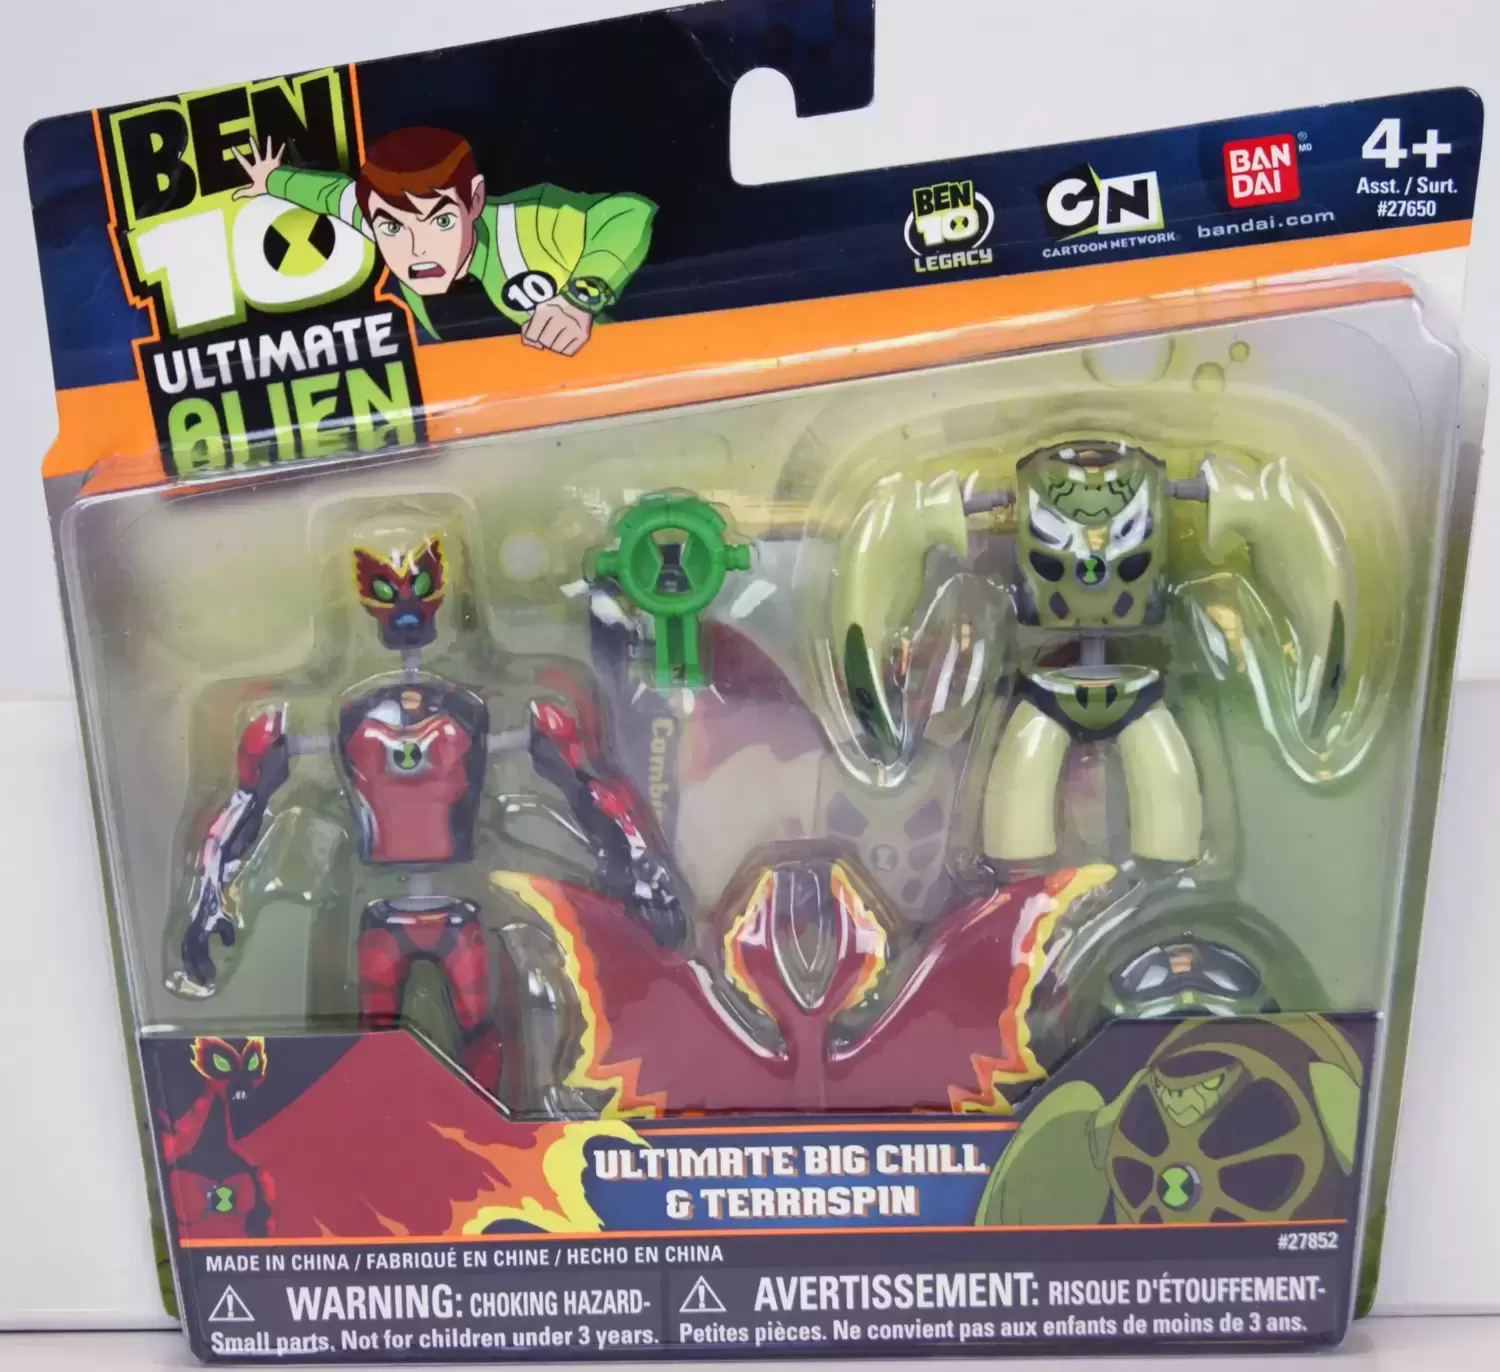 Ben 10 Ultimate Alien - Ultimate Big Chill and Terraspin Alien Creation 2-Pack